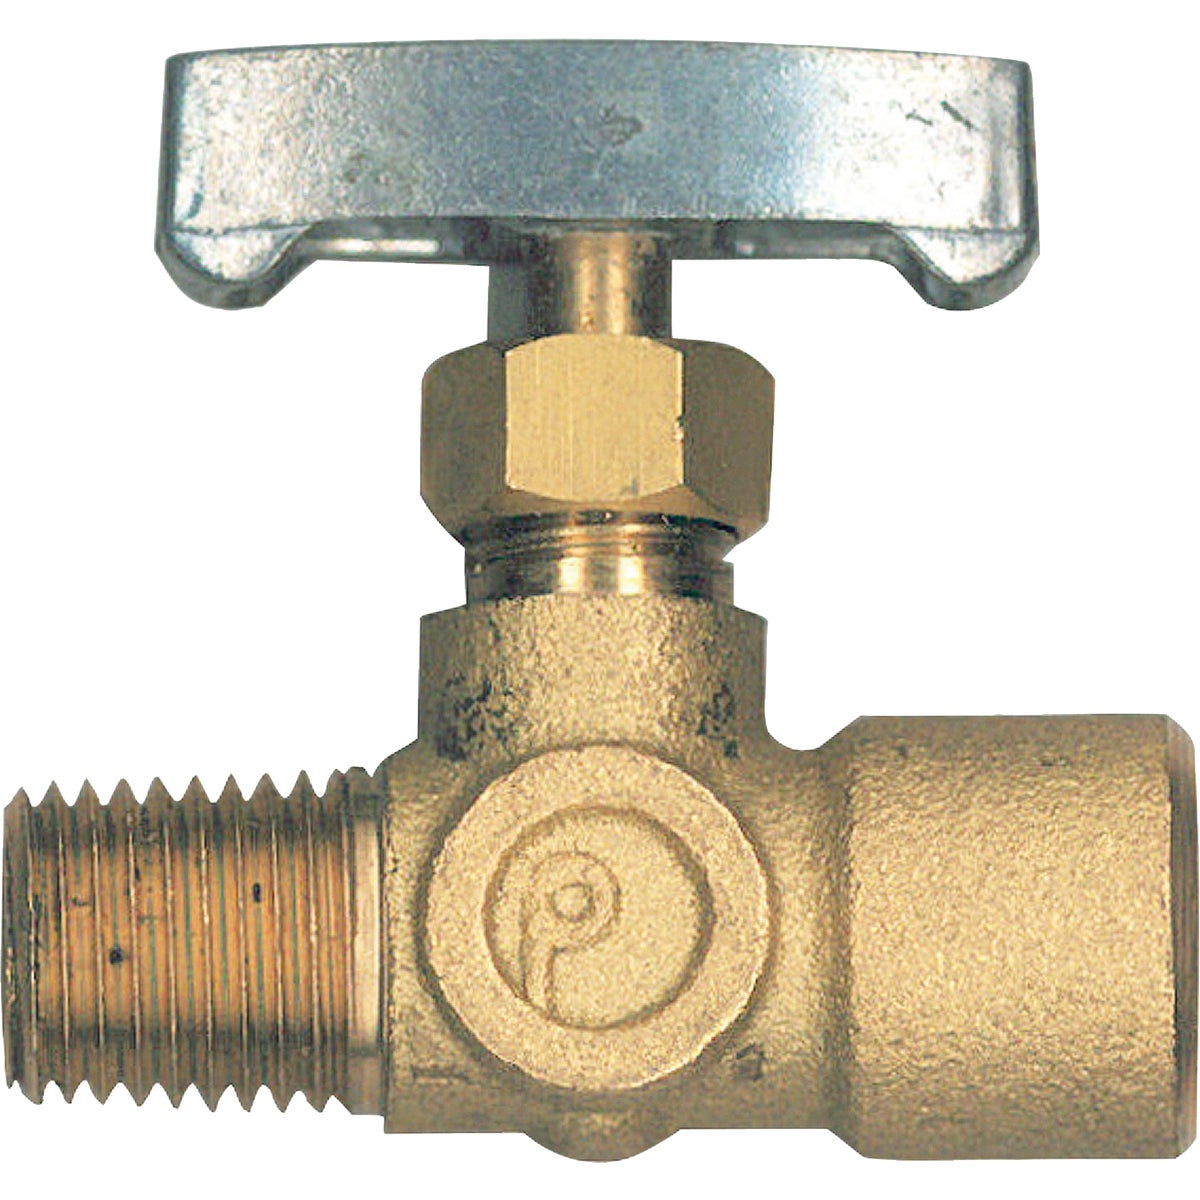 Item 801870, Replacement Bayou Classic Control Valve is 1/4 In.